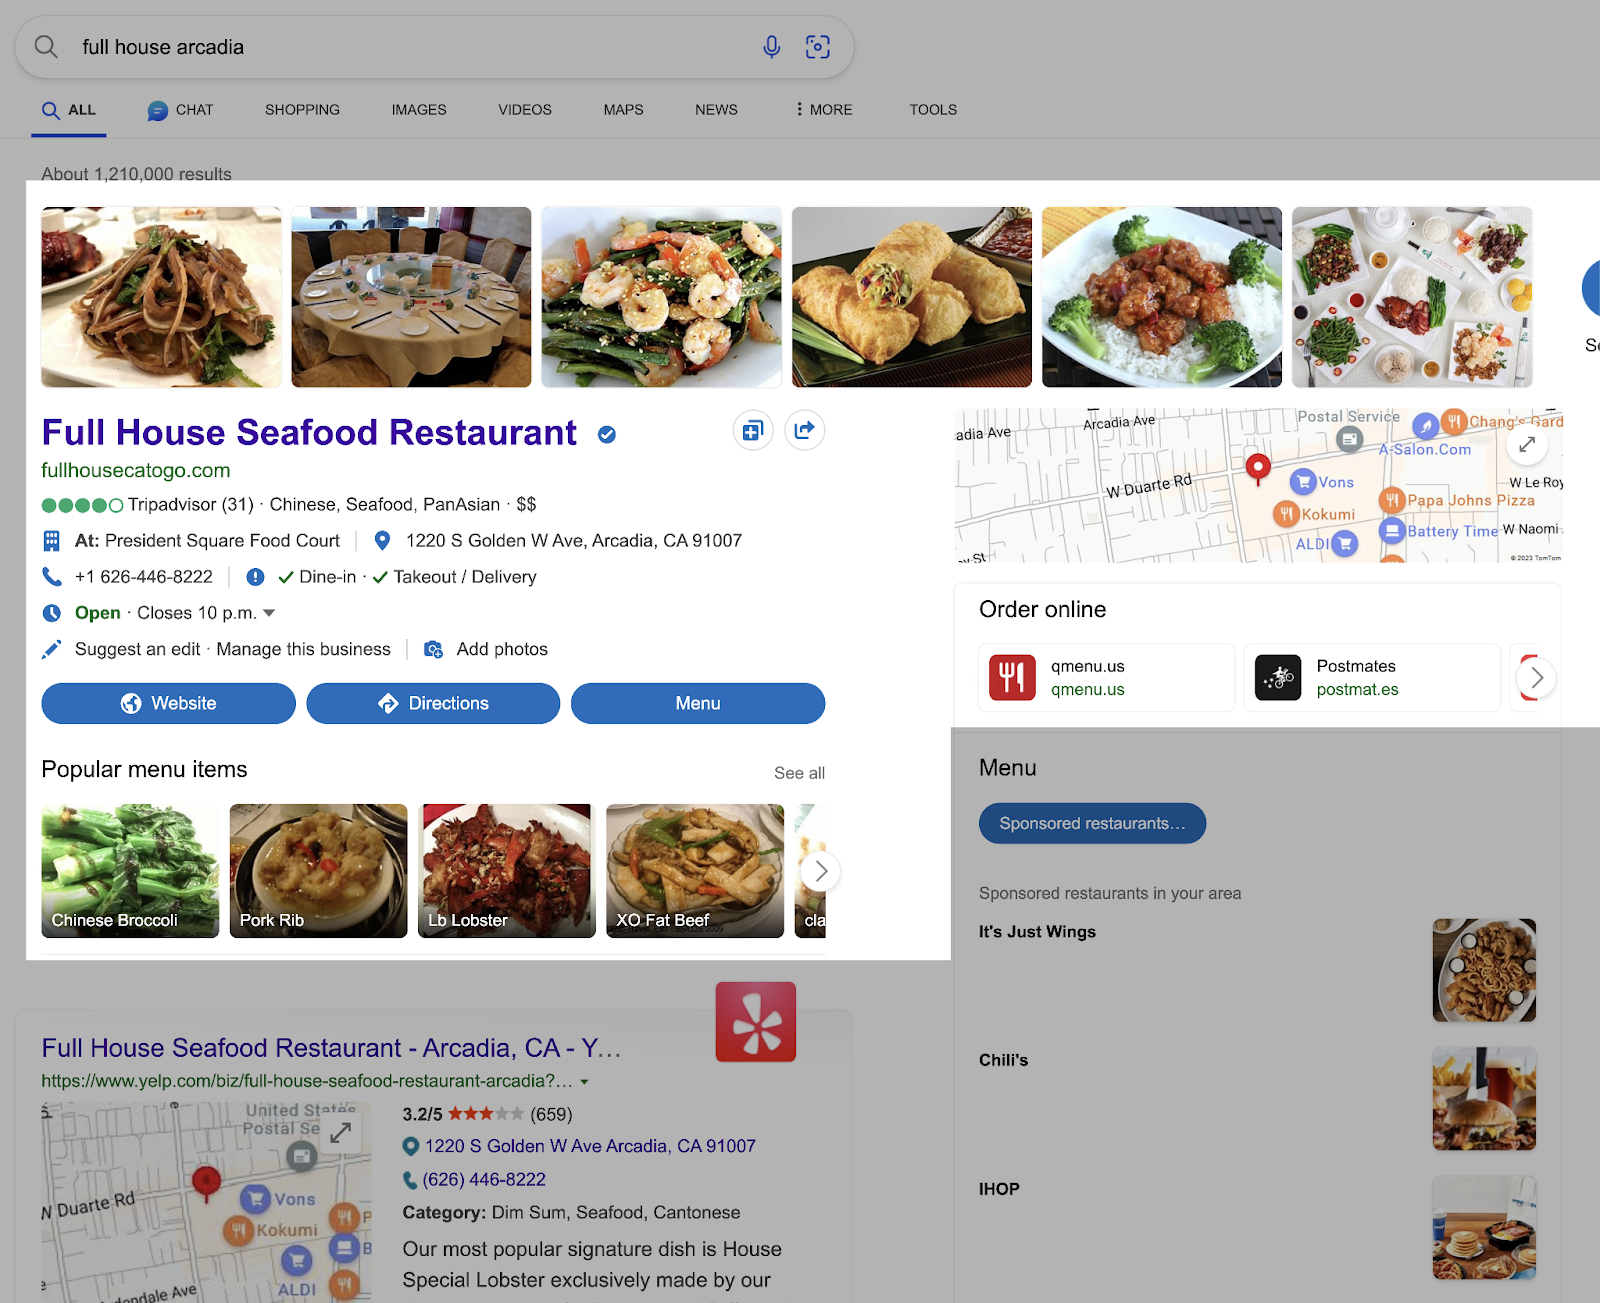 "Full House Seafood Restaurant" listing on Bing